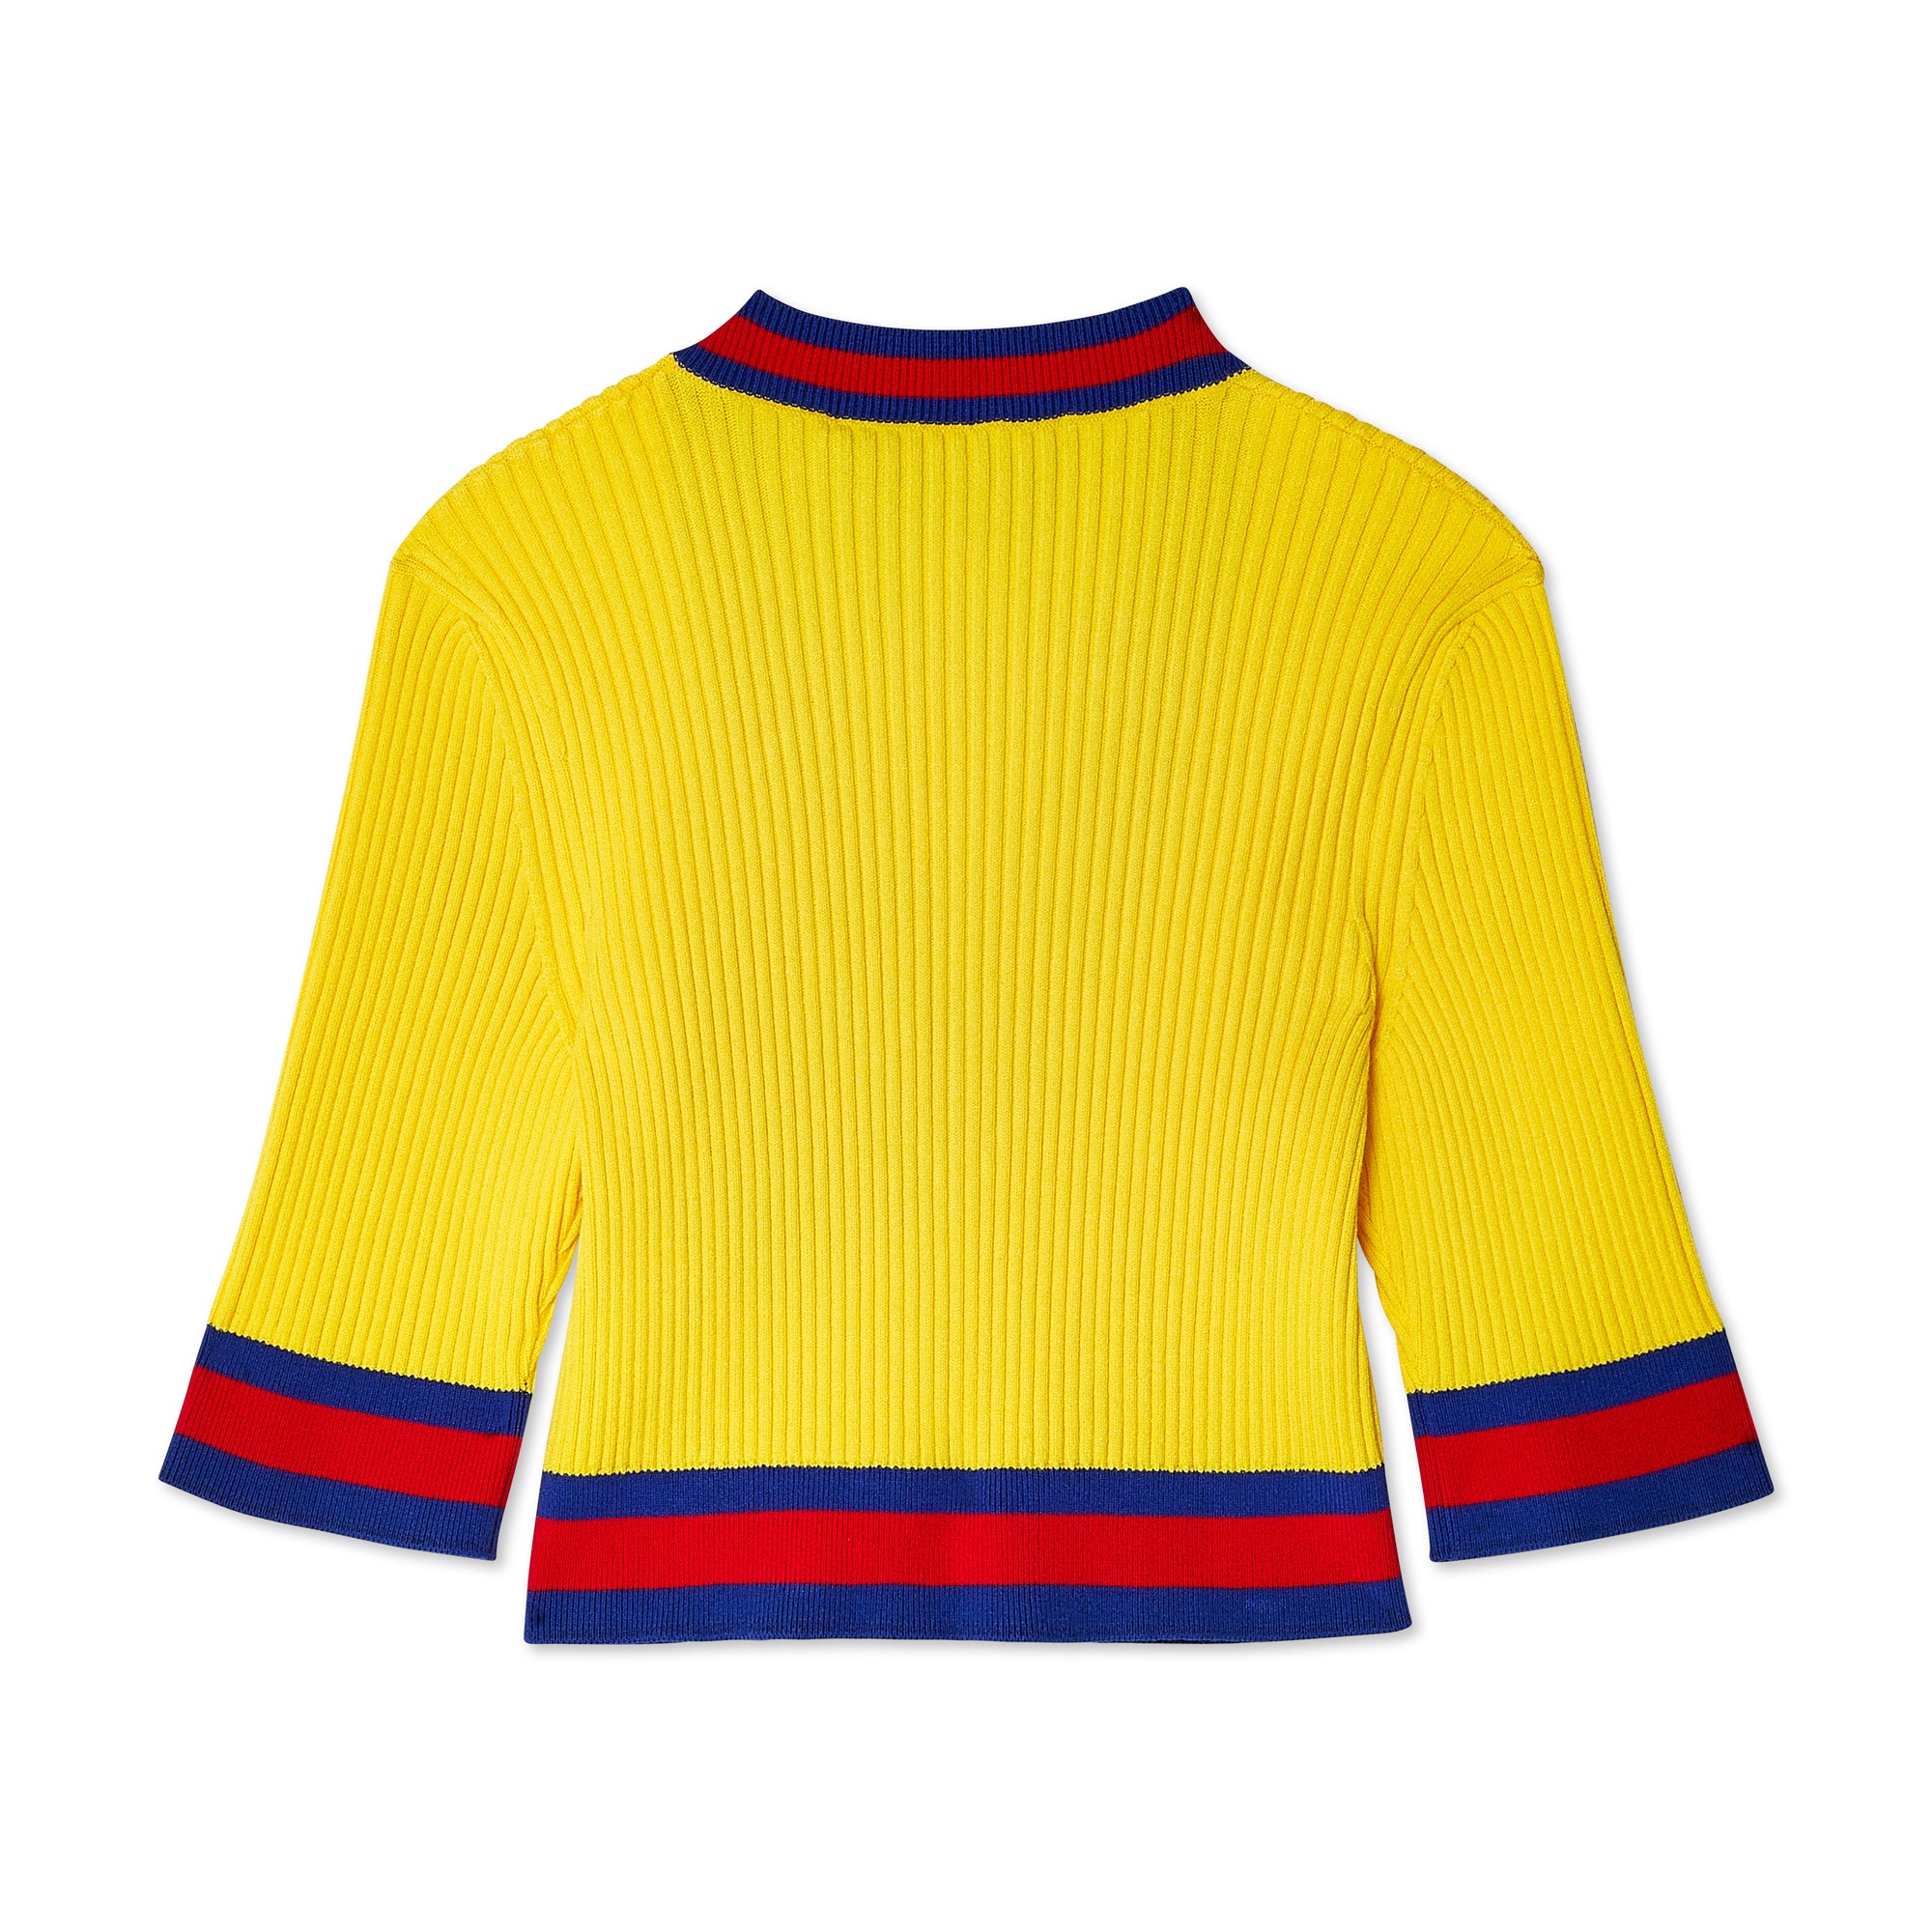 Gucci - Women's Top - (Yellow/Red) view 2